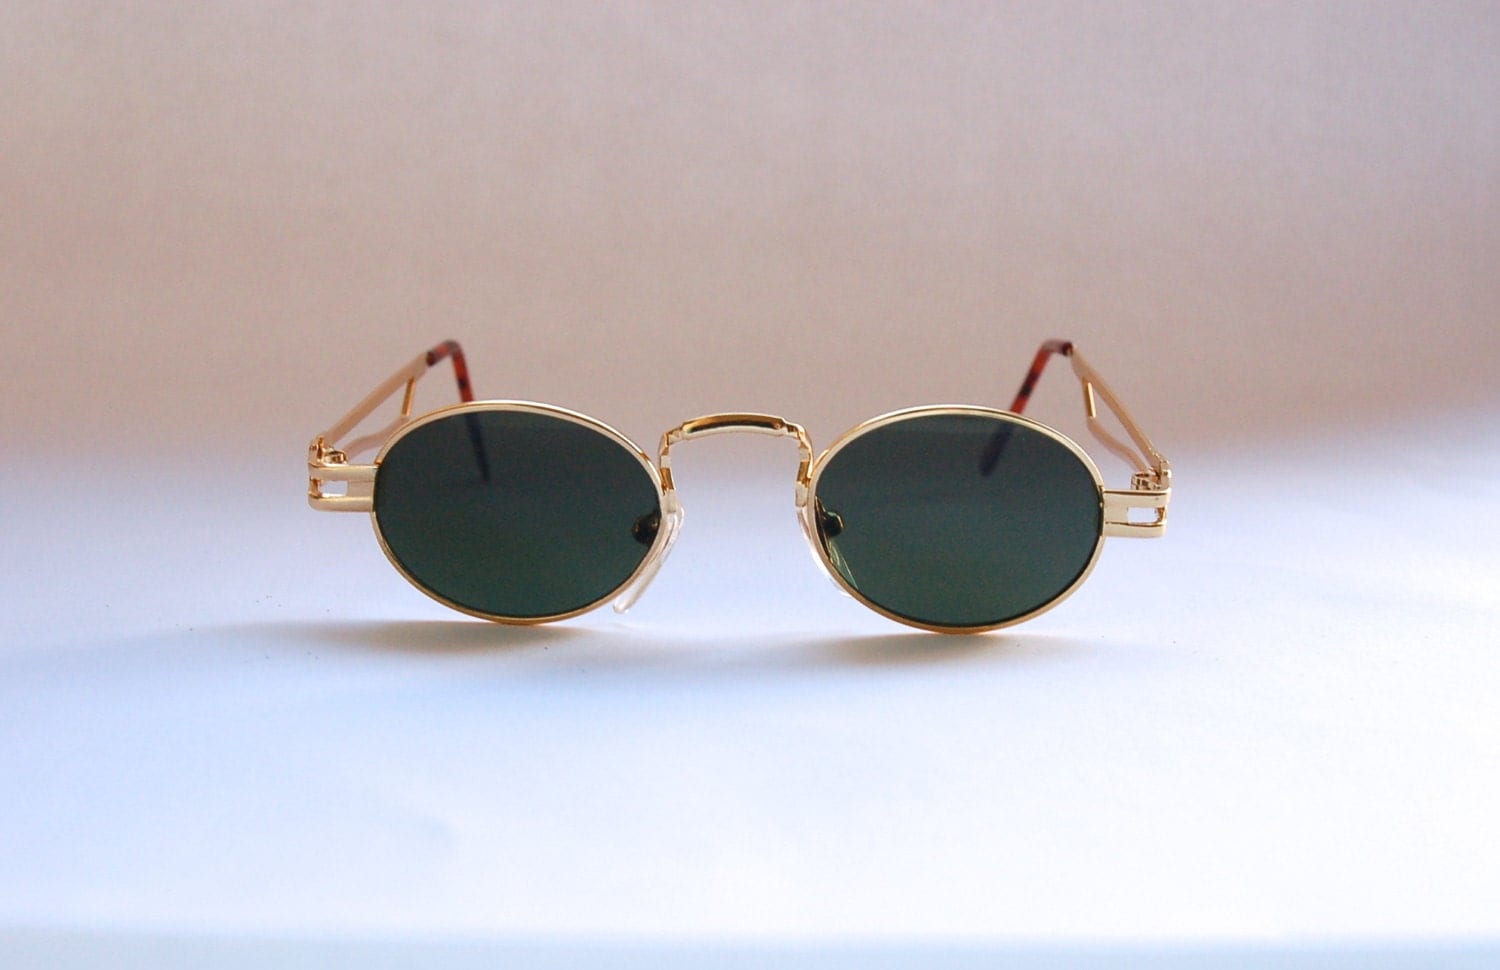 Authentic Vintage 90s Circle Sunglasses/ Oval Shades w Gold